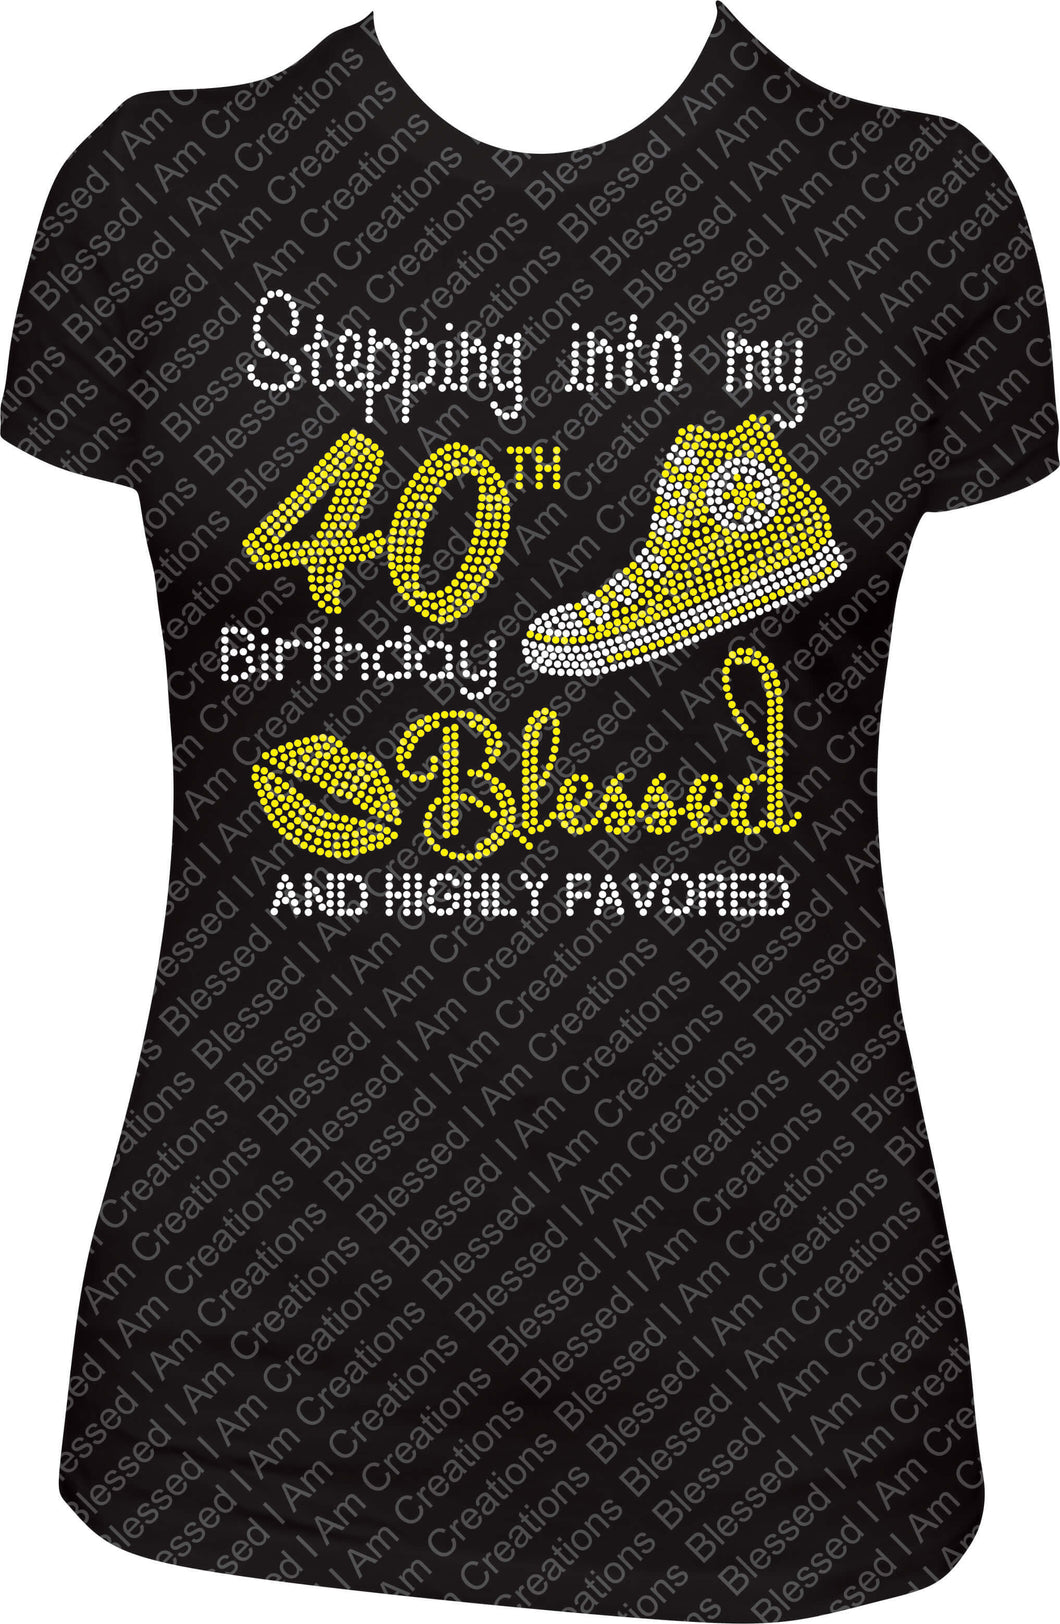 Stepping into my 40th Birthday Blessed and Highly Converse Rhinestone Birthday Shirt